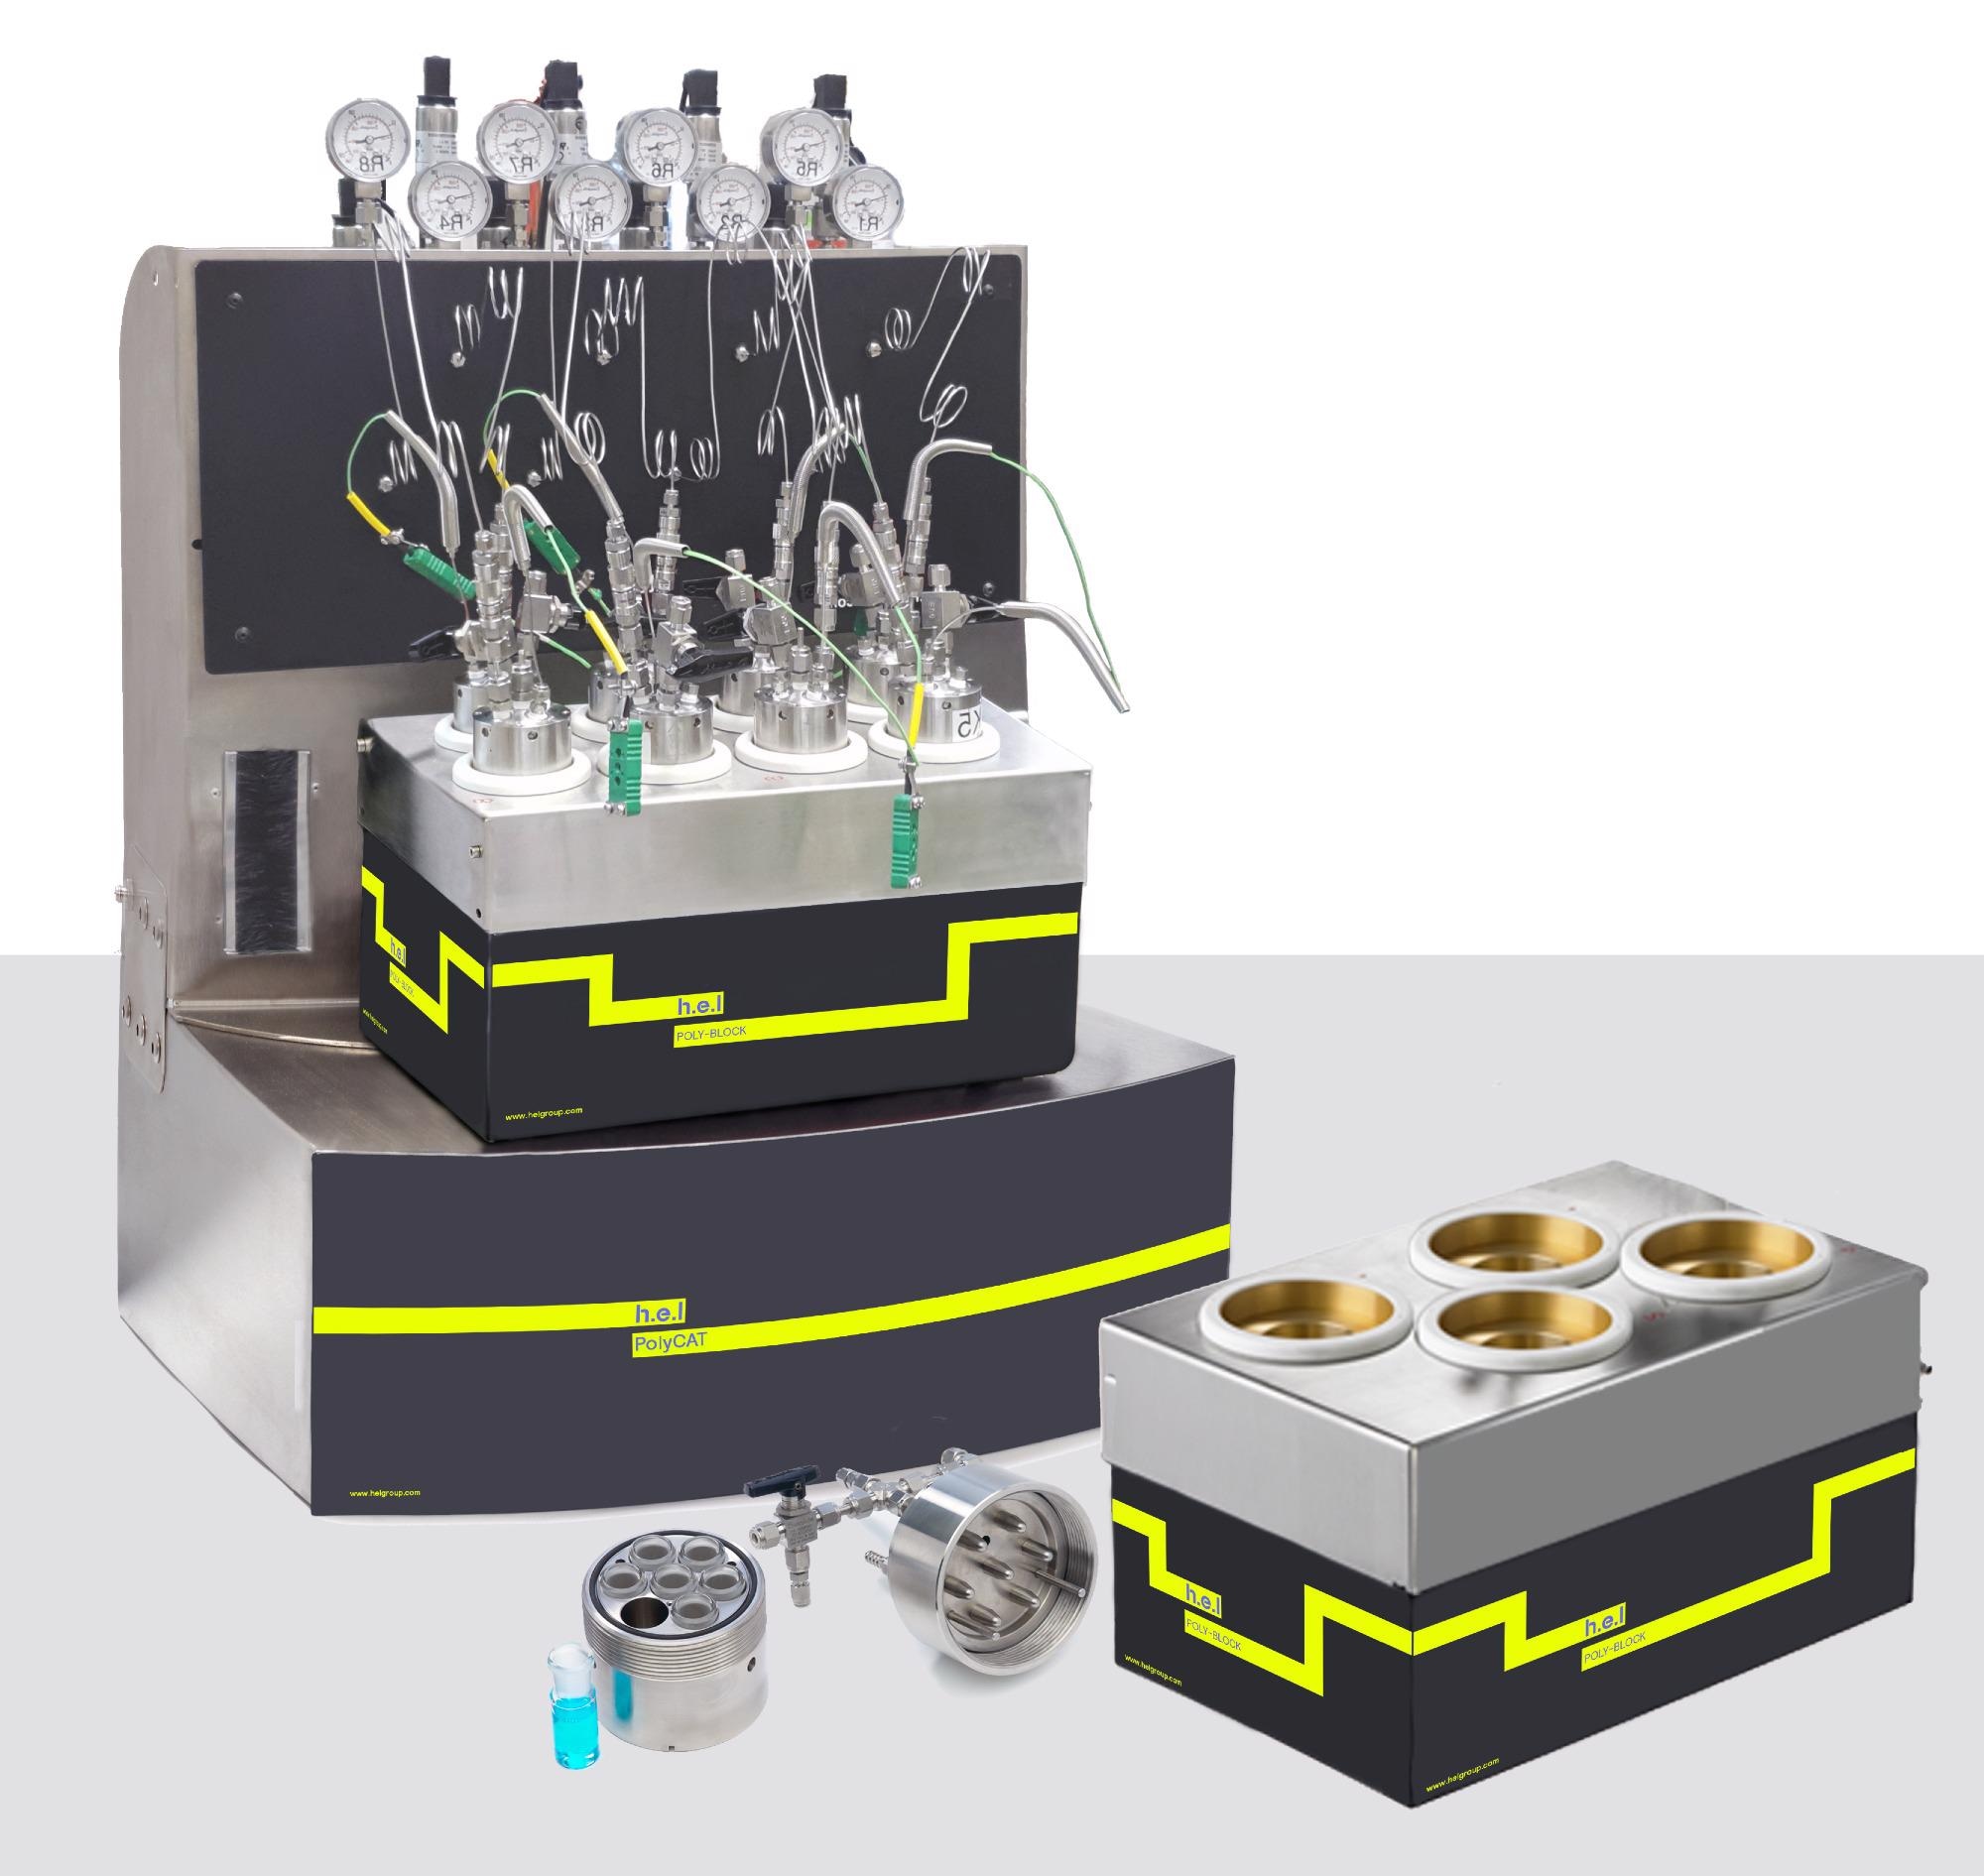 PolyCAT 4: Bench-top, 4-reactor, automated parallel catalyst screening platform